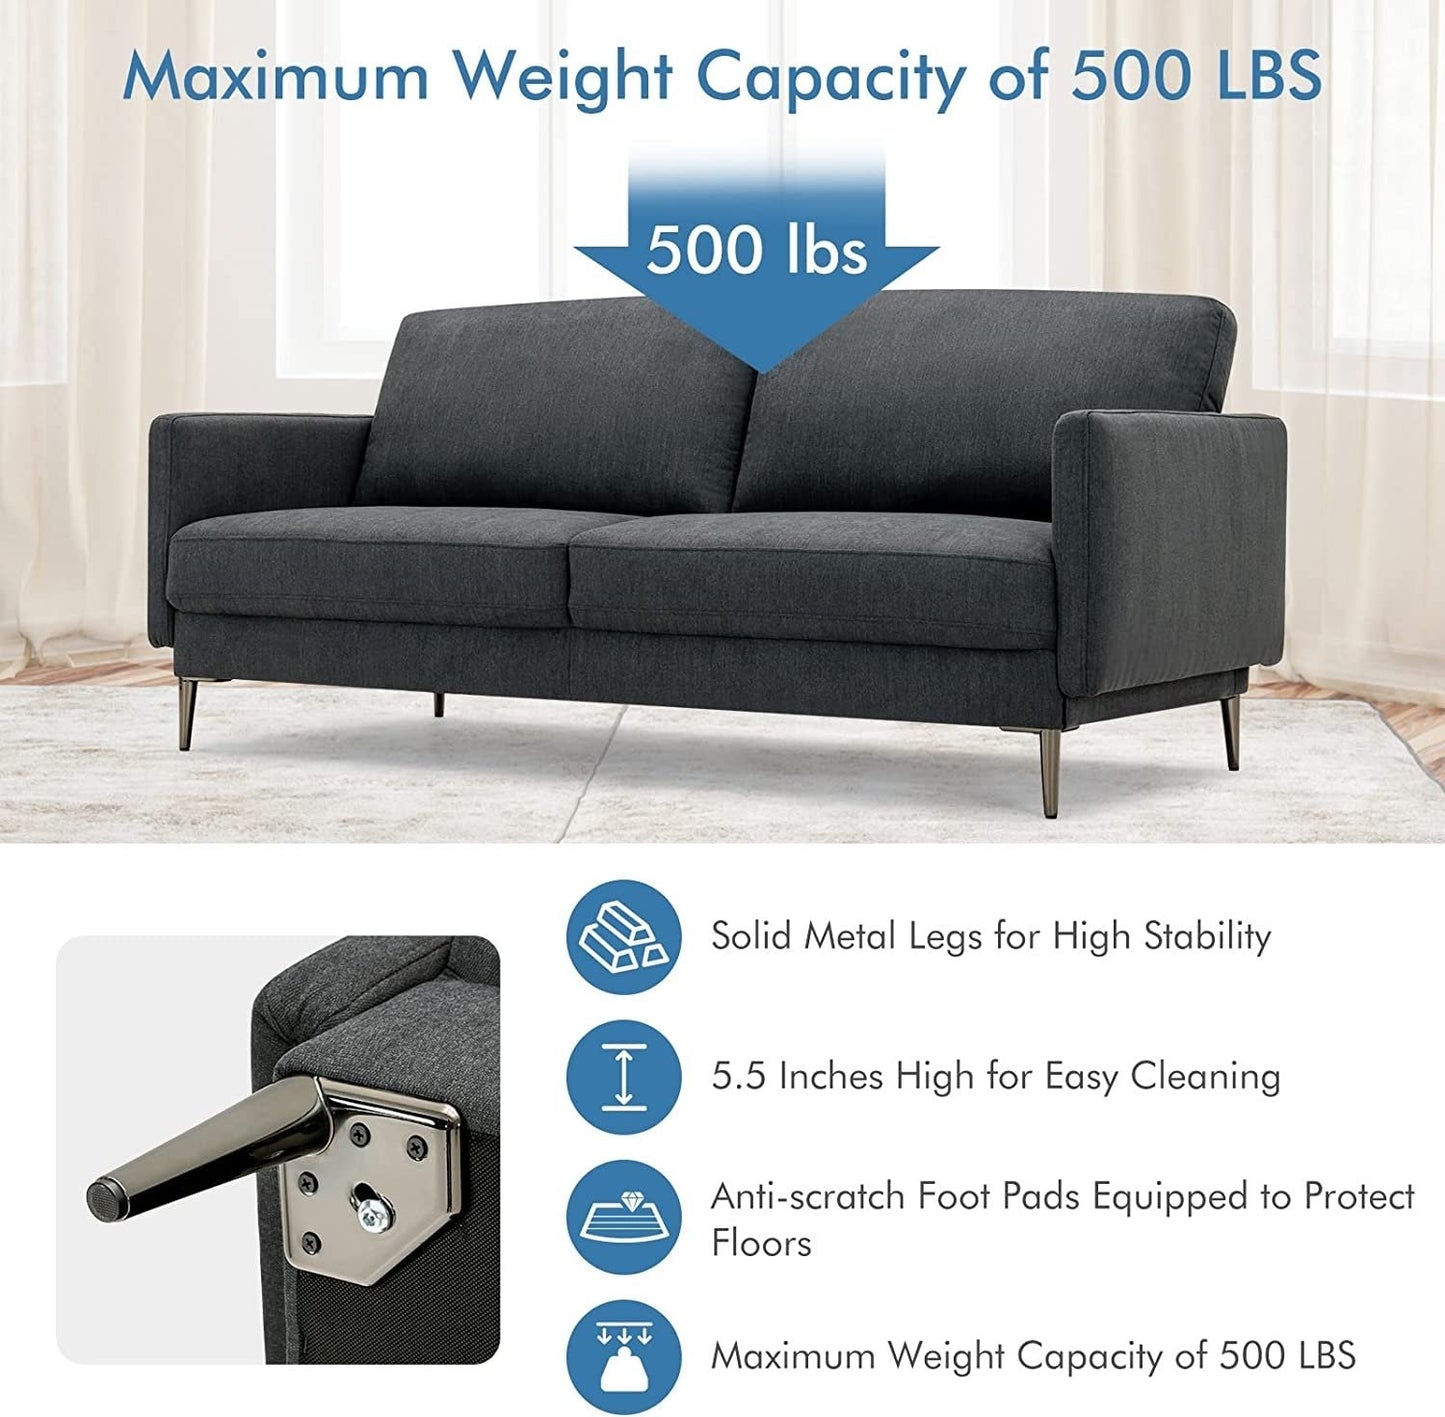 Modern Loveseat with Comfy Backrest Cushions, Gray